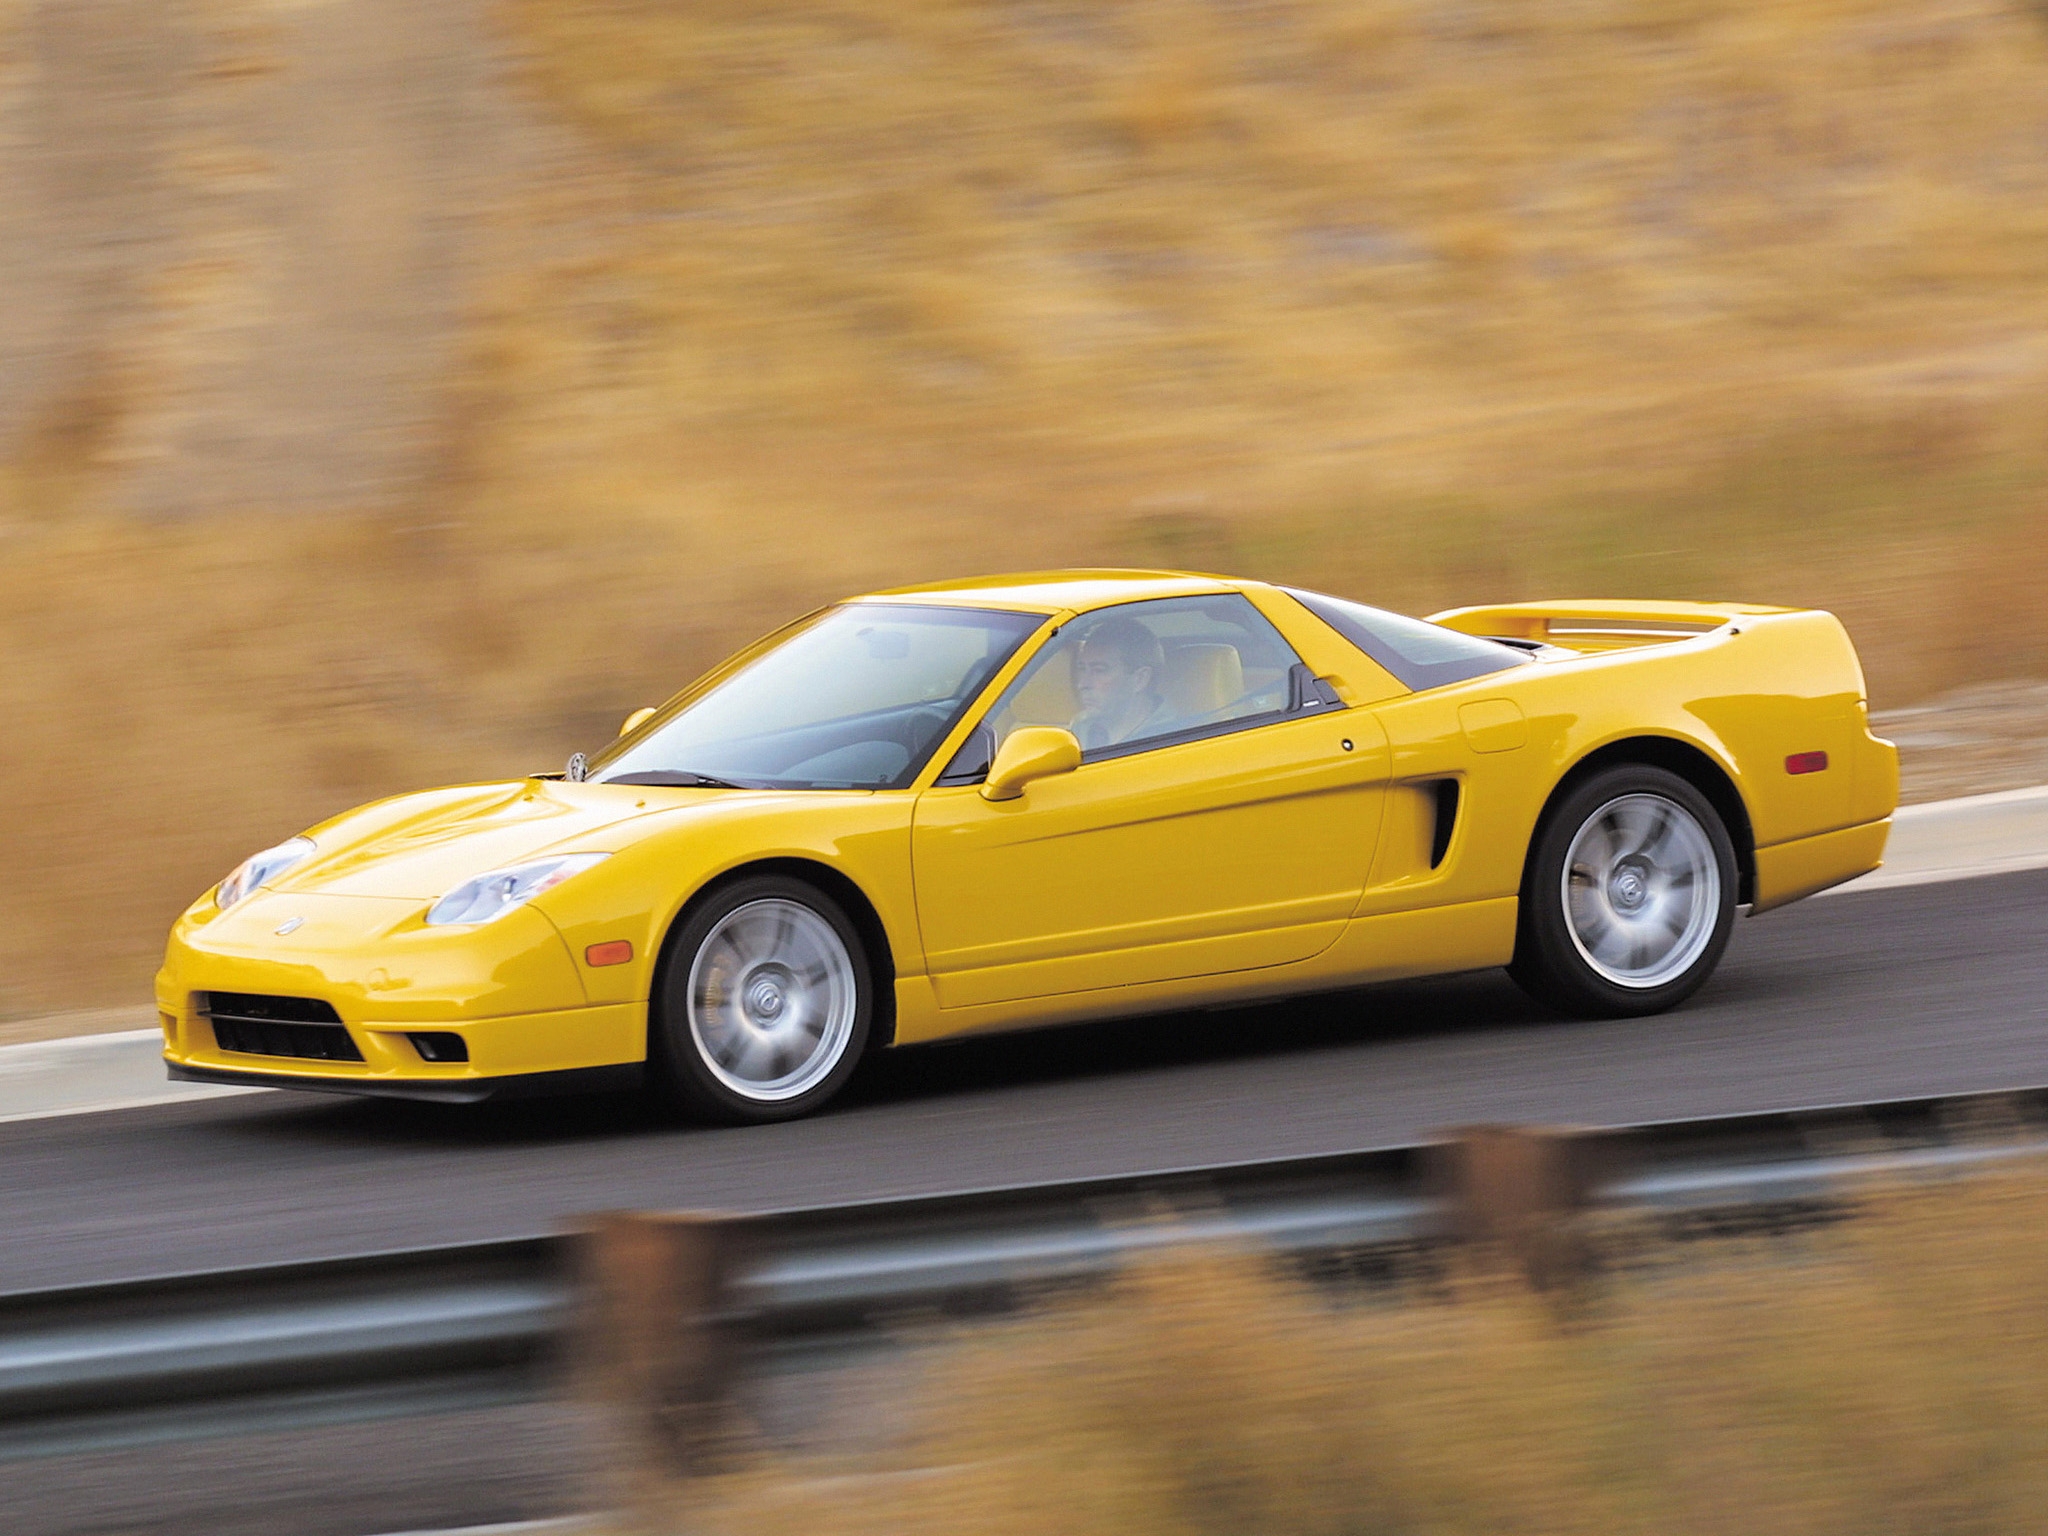 sports, auto, acura, cars, yellow, road, side view, speed, style, akura, paints, nsx, hsx, nsh